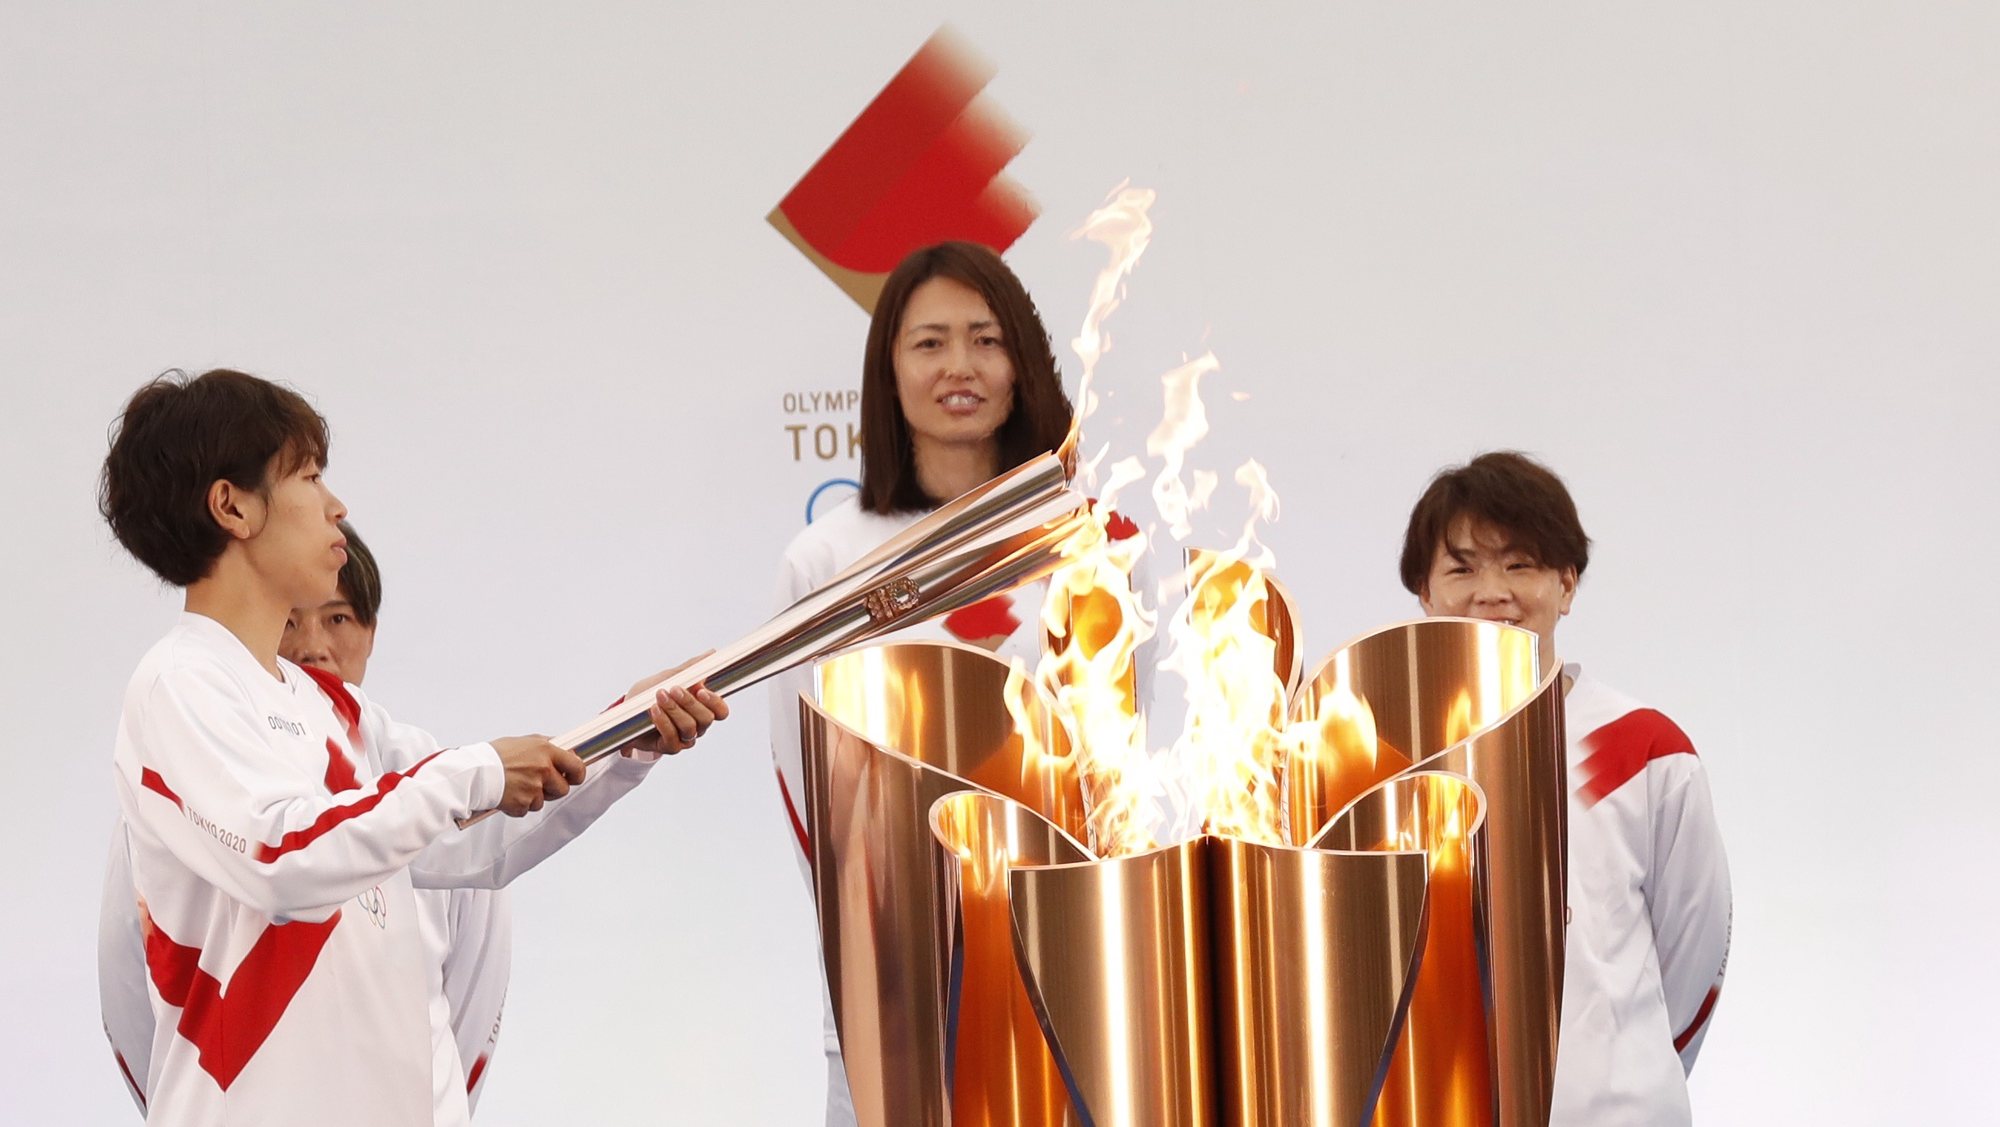 epa09095217 The Olympic torch is lit by a member of Japan&#039;s women&#039;s national soccer team Nadeshiko Japan during the Tokyo 2020 Olympic Torch Relay Grand Start in Naraha, Fukushima prefecture, Japan, 25 March 2021. The postponed Tokyo 2020 Olympic Games are scheduled to start on 23 July 2021 and some 10,000 torchbearers will run across the country along a 121-day journey.  EPA/KIM KYUNG-HOON / POOL